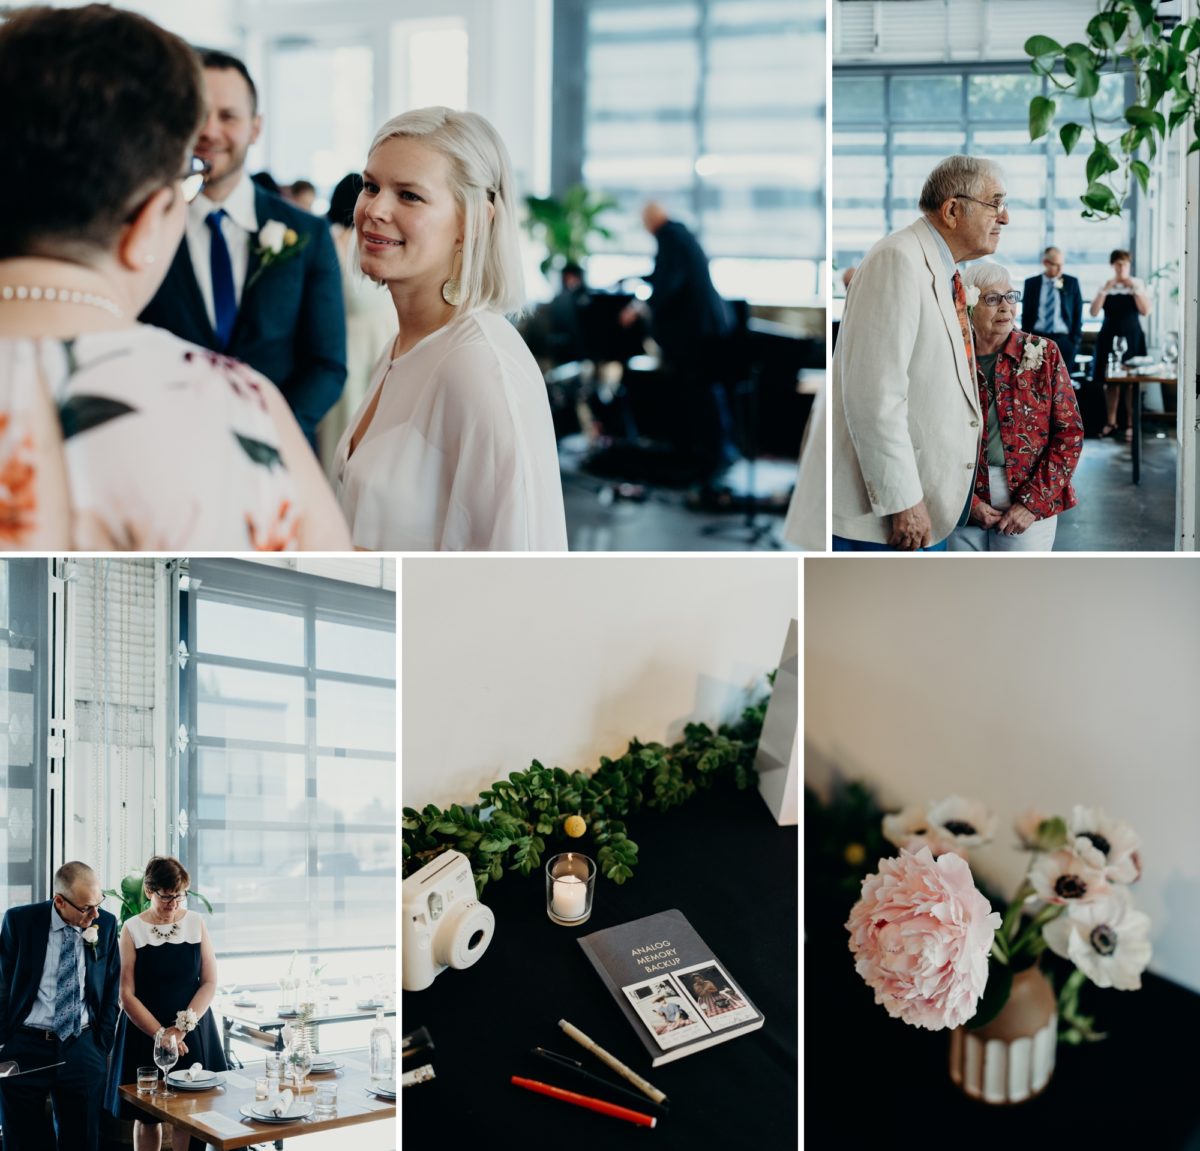 Candids and details at this Coopers Hall wedding in Portland, OR